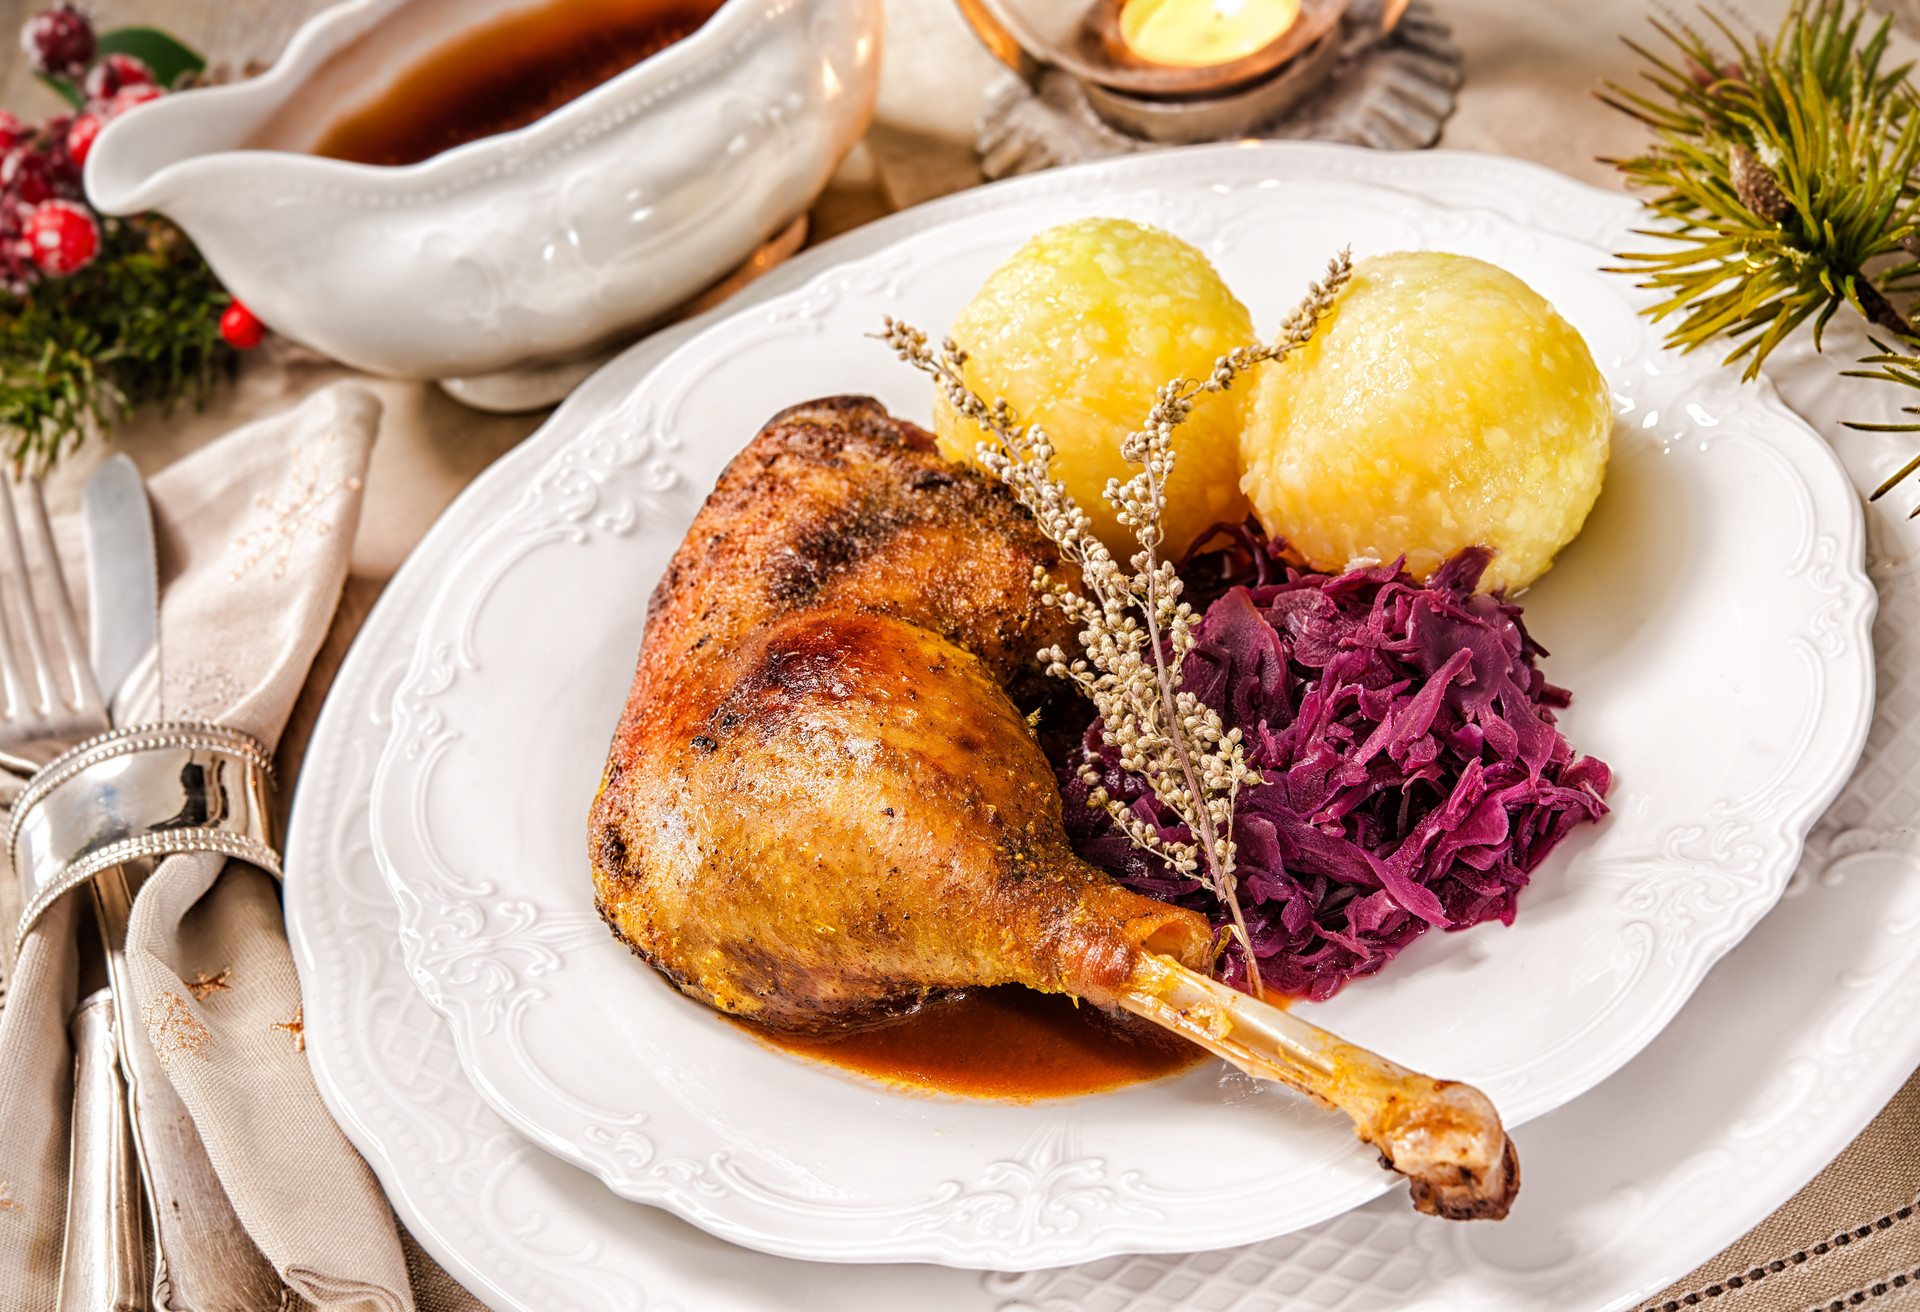 Crusty Christmas goose leg with braised red cabbage and dumplings; Shutterstock ID 331604447; Purpose: Virtual Christmas Guides; Brand (KAYAK, Momondo, Any): Kayak; Client/Licensee: KAYAK